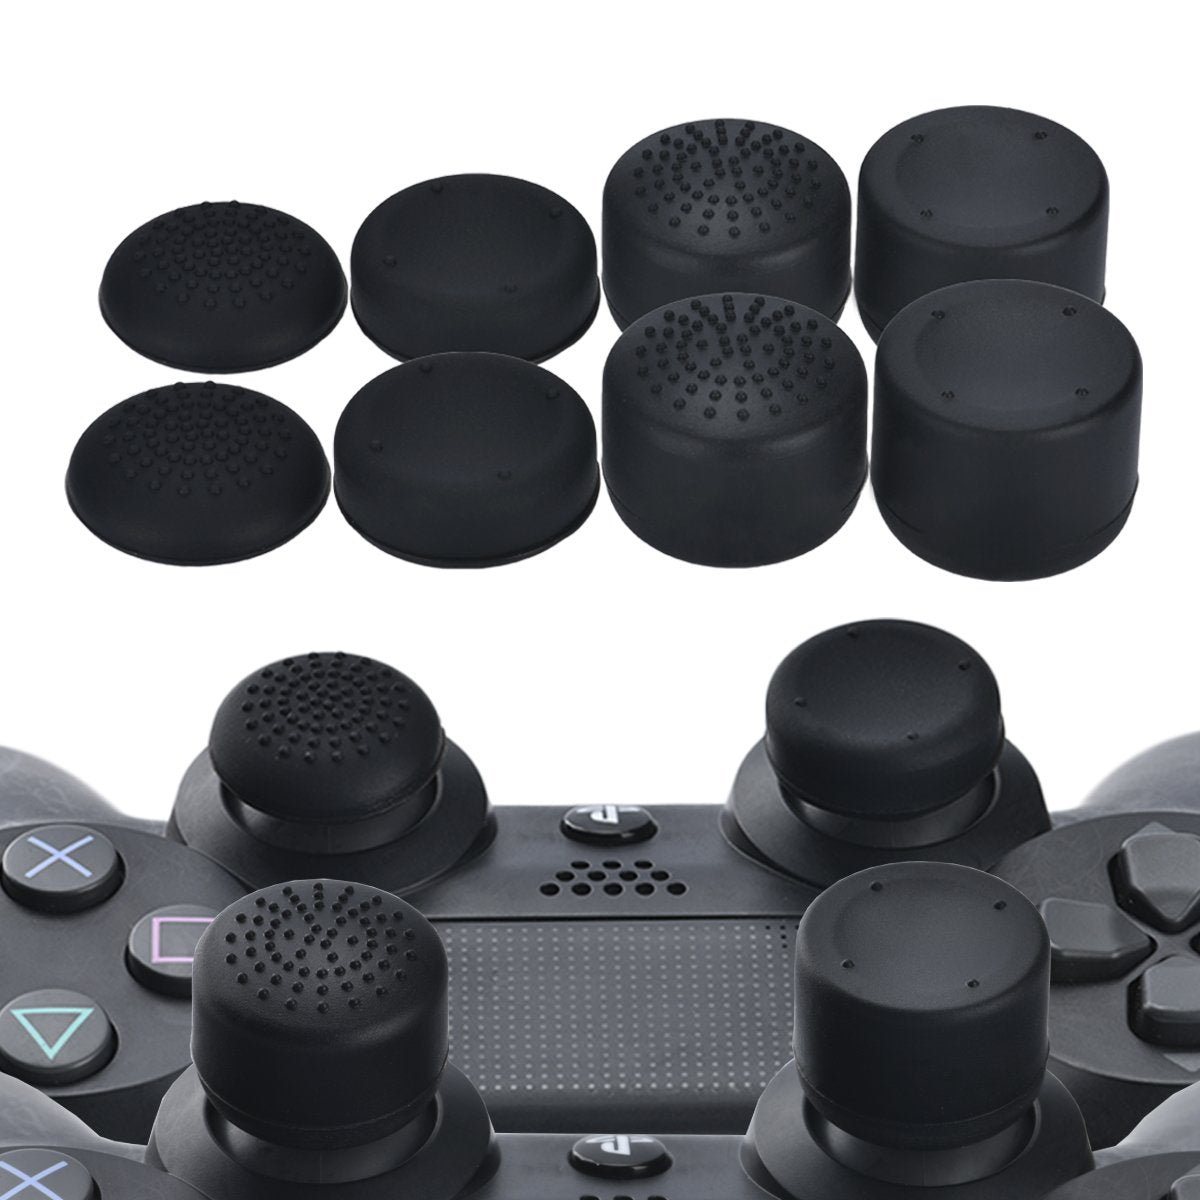 PS4 Controller Silicone Skin with Finger Grips Bundle BN30